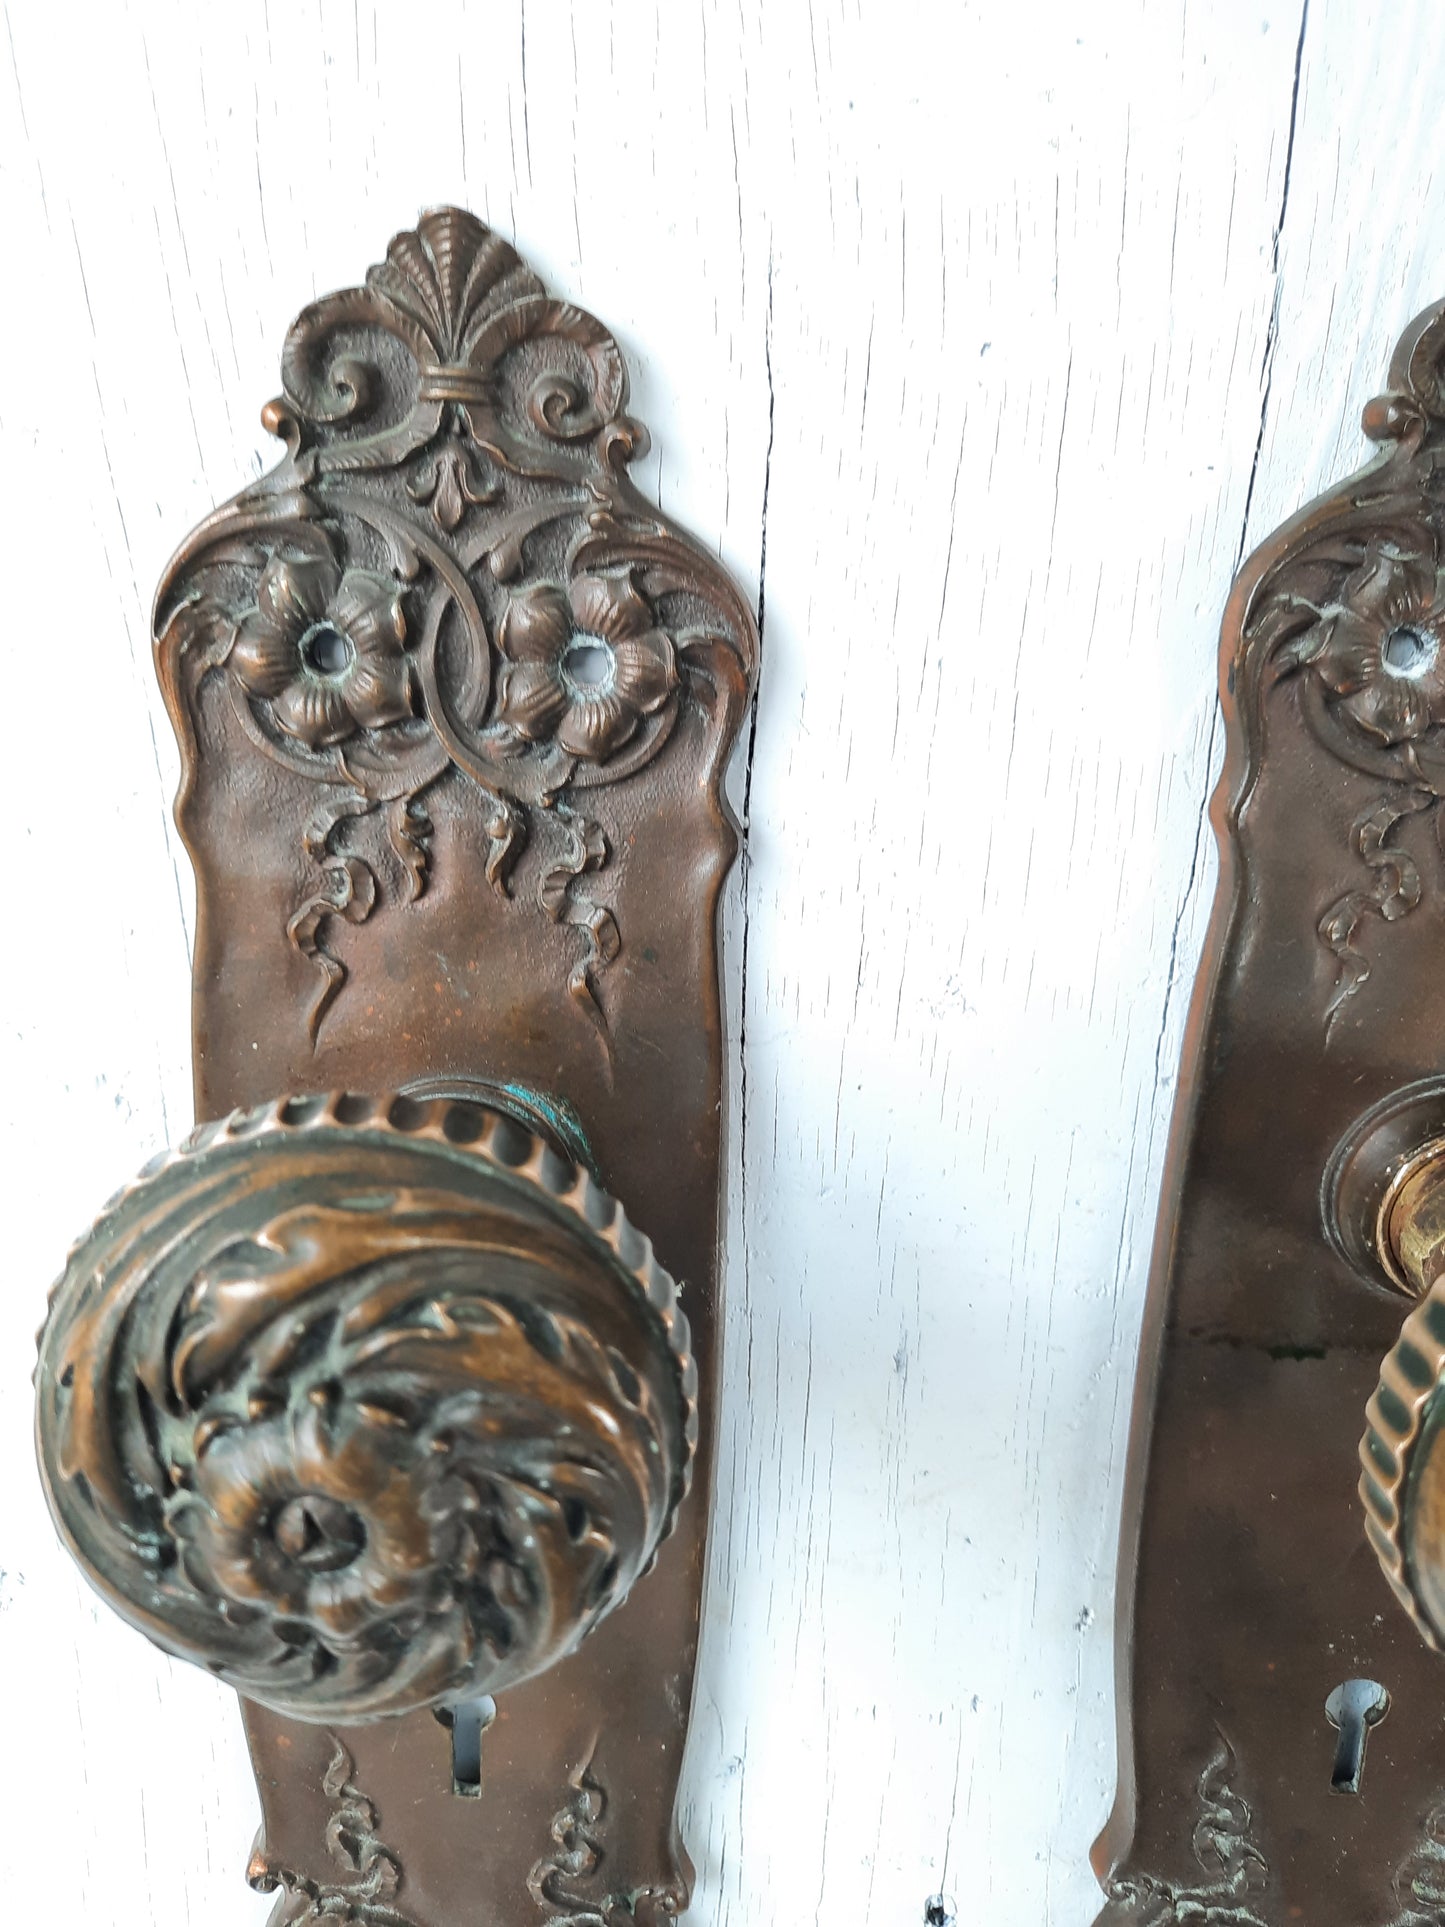 Urbino Pattern by Yale and Towne Antique Door Hardware, Antique Bronze Doorknobs and Backplates, Victorian Era 032603